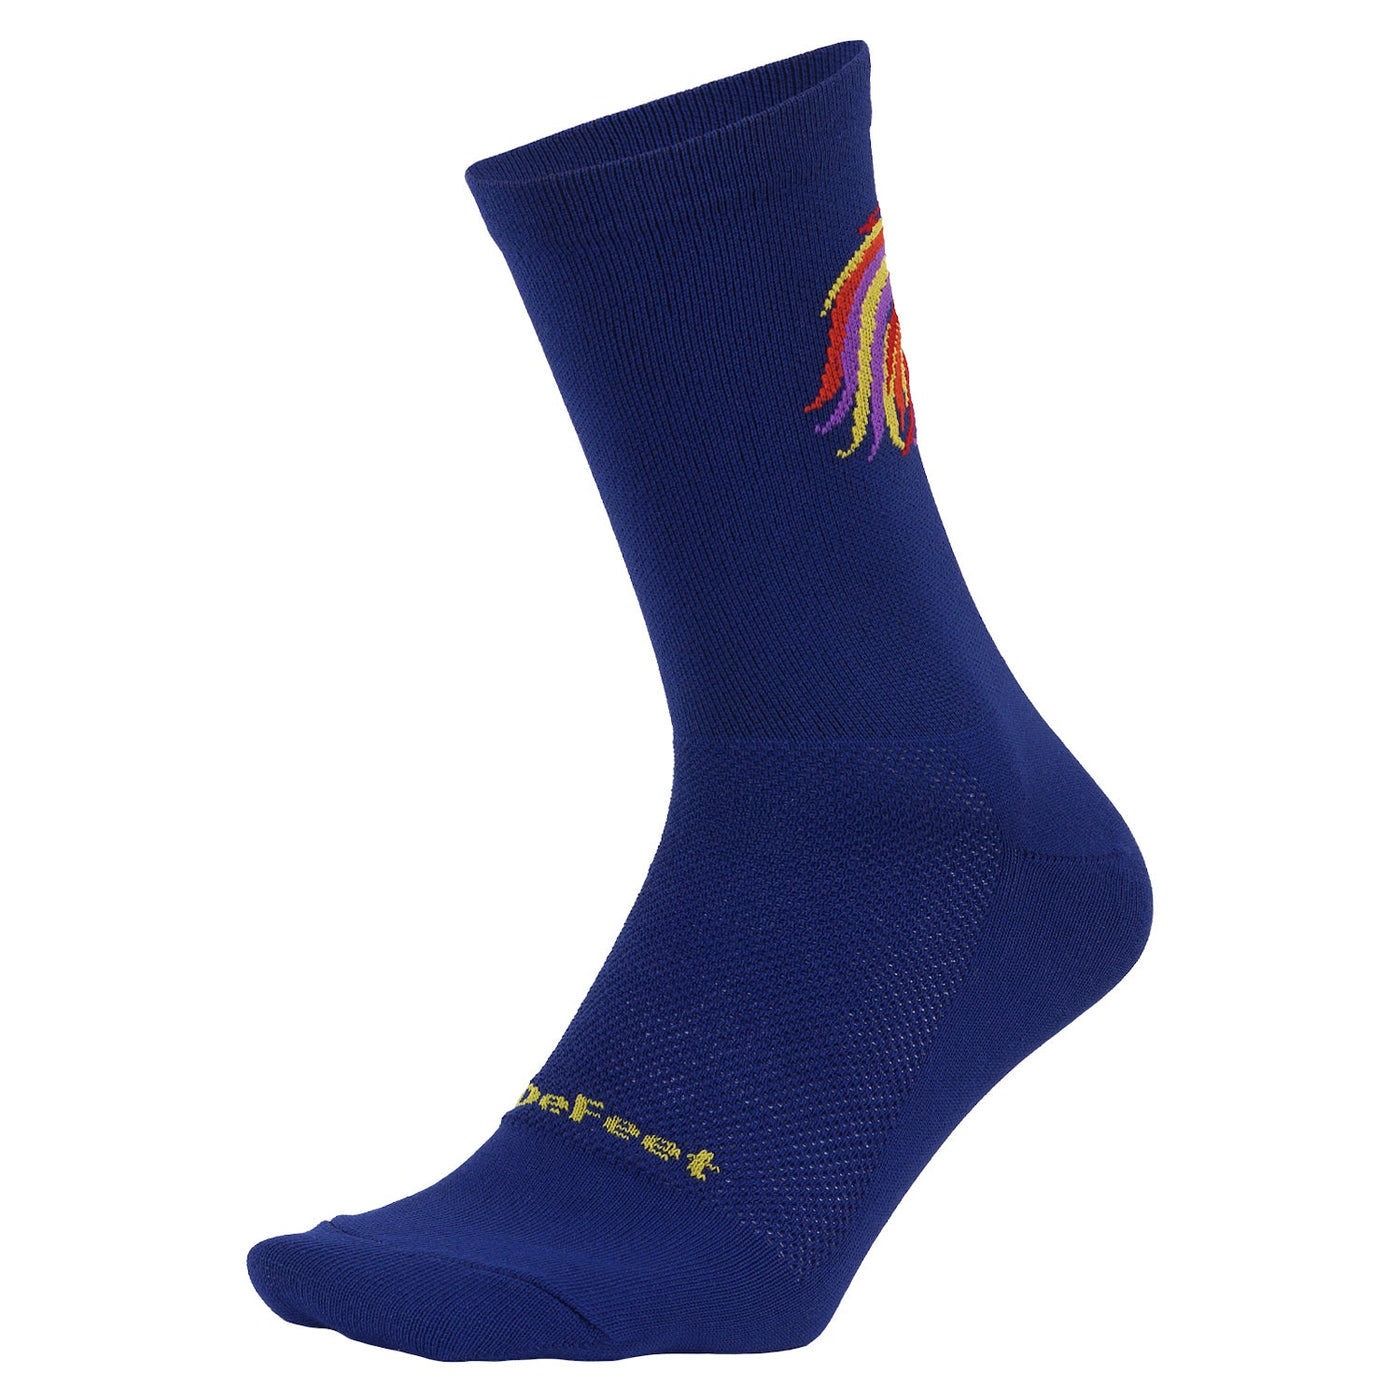 Aireator 6" Rooster - DeFeet